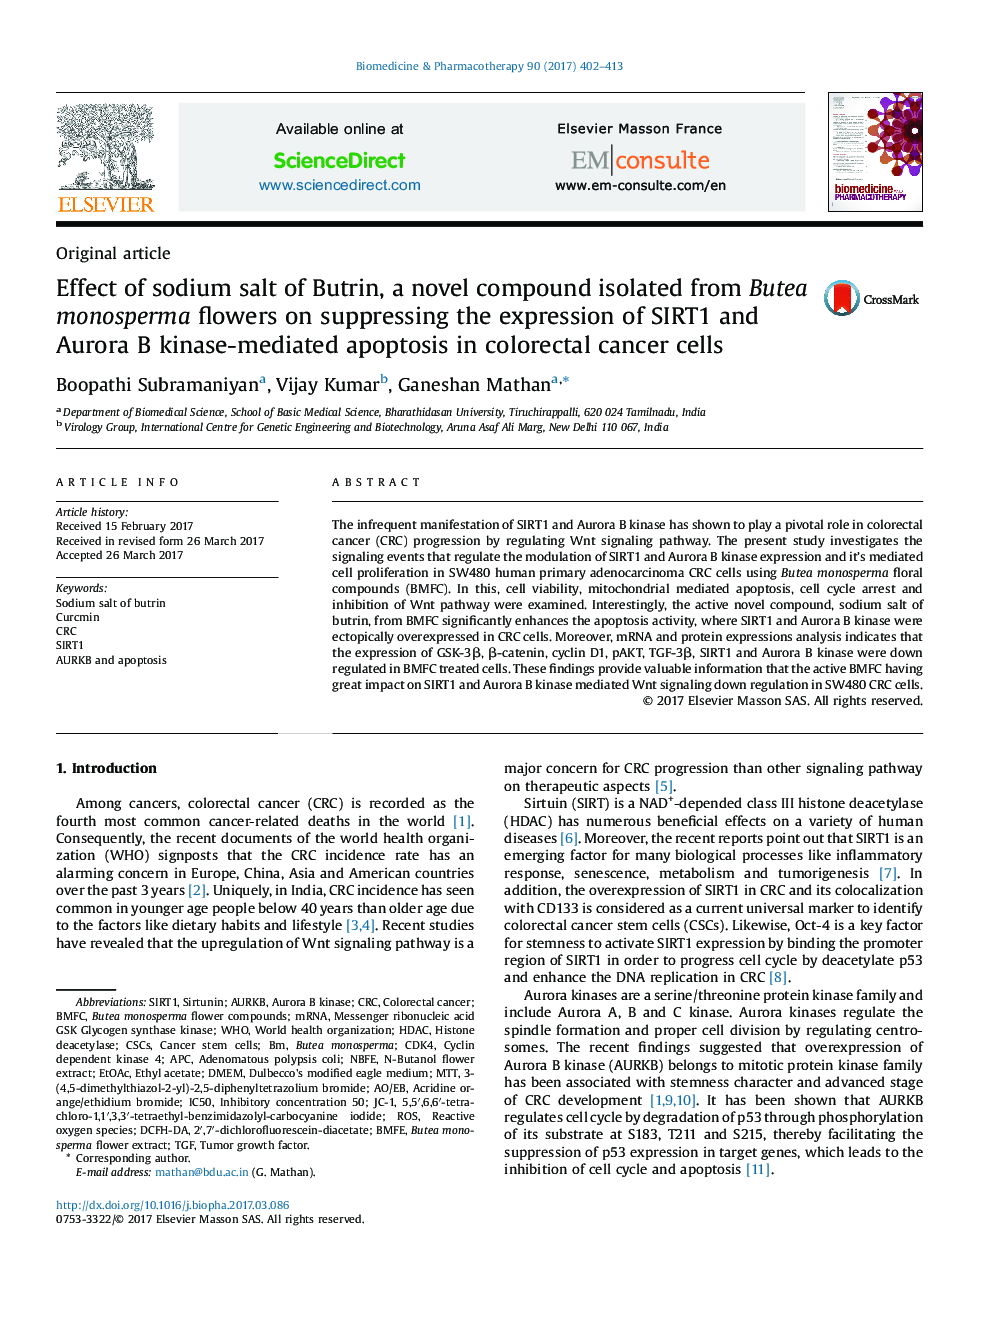 Effect of sodium salt of Butrin, a novel compound isolated from Butea monosperma flowers on suppressing the expression of SIRT1 and Aurora B kinase-mediated apoptosis in colorectal cancer cells